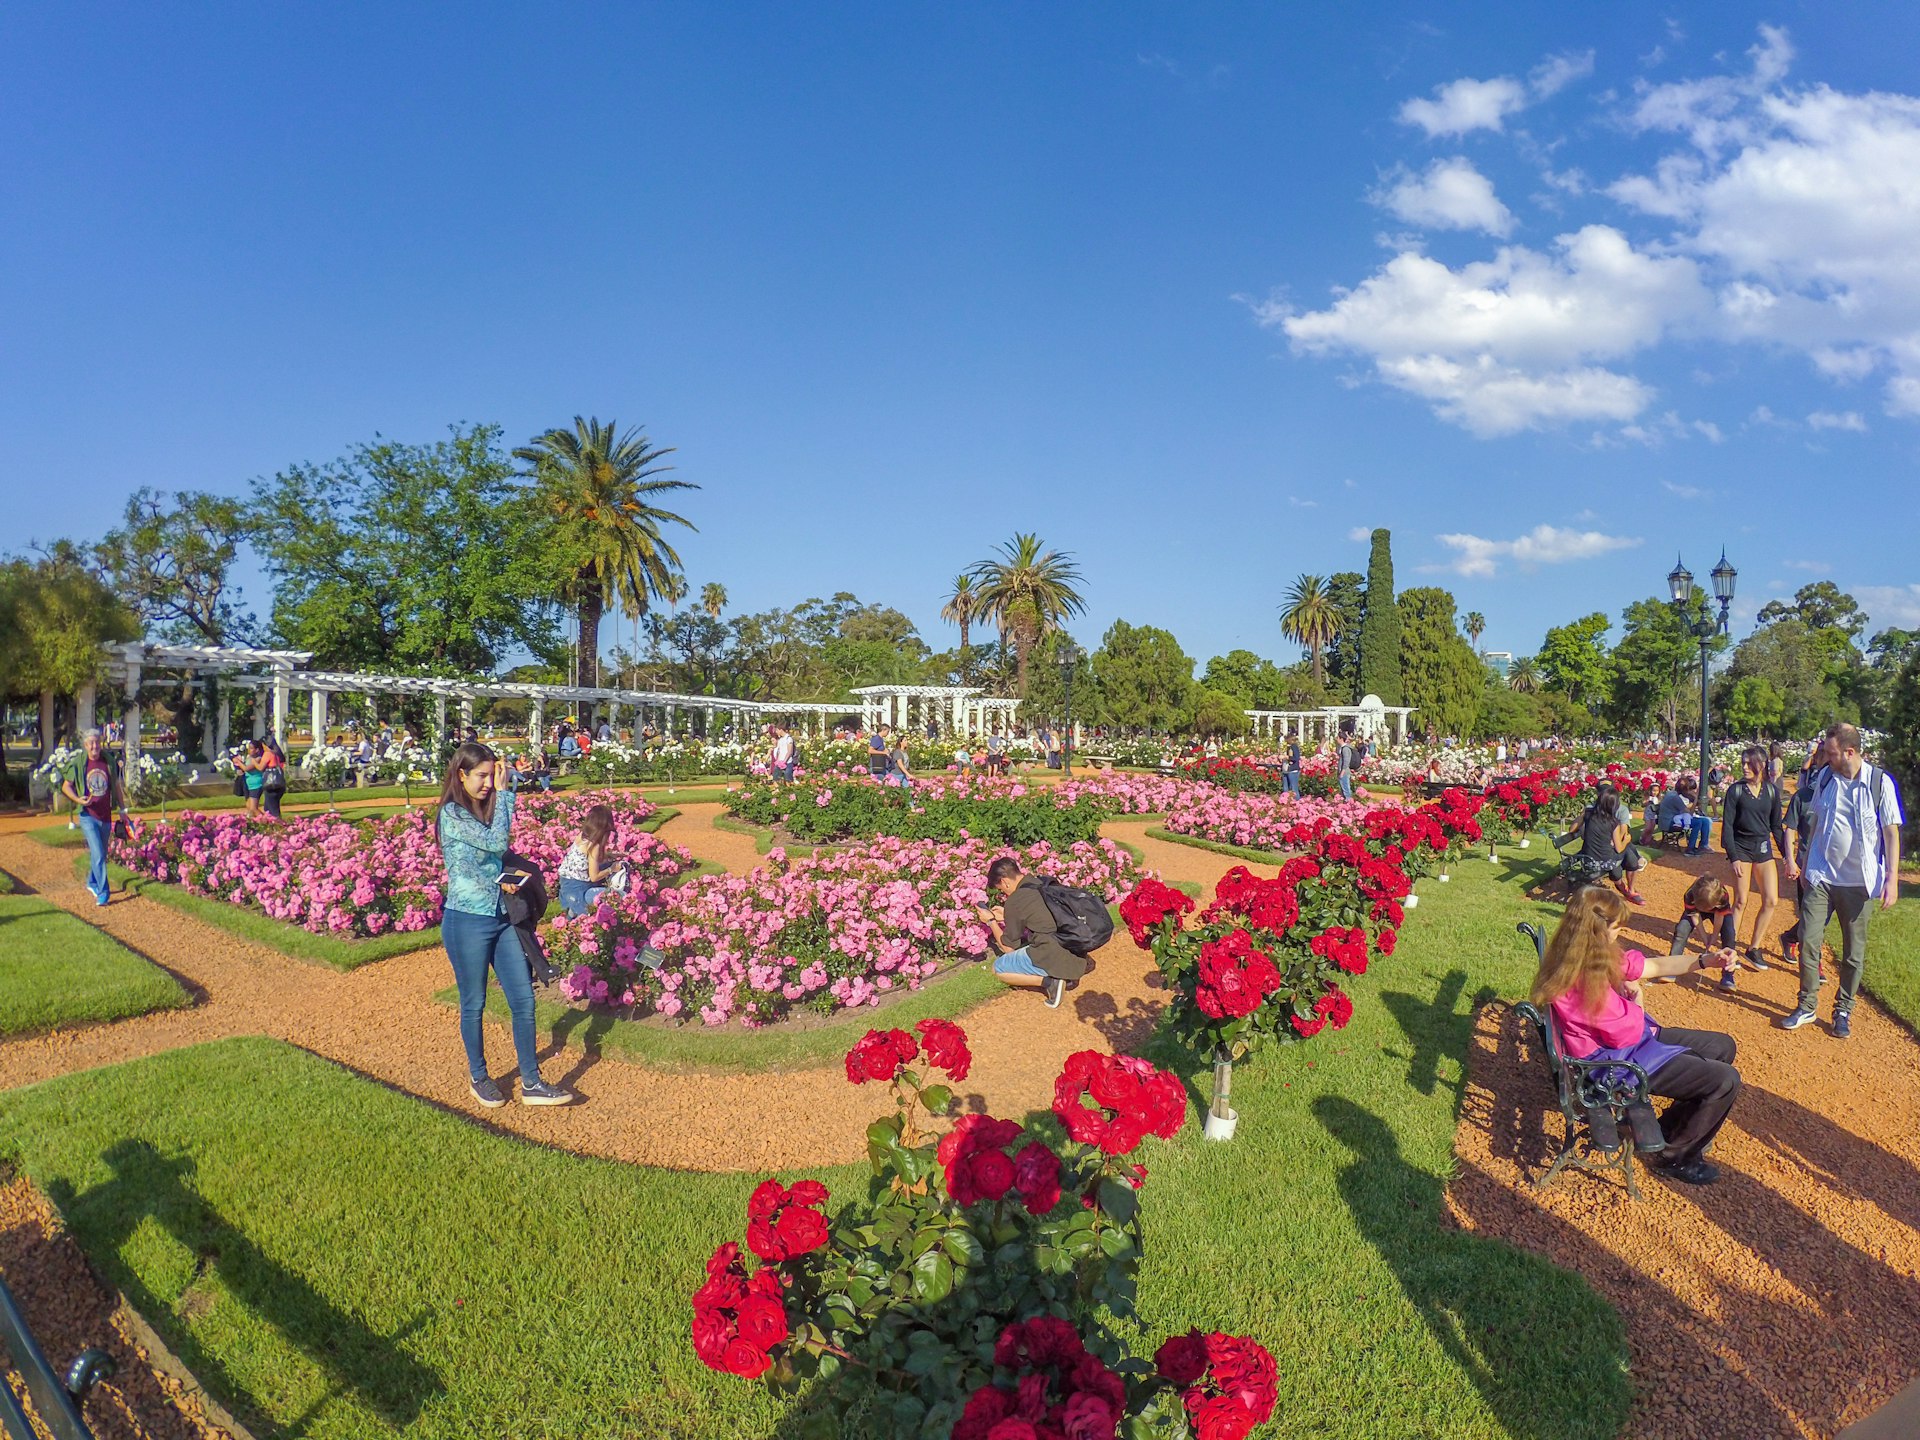 A rose garden with many flowers in bloom, being visited by lots of people who sit on benches or admire the roses up-close